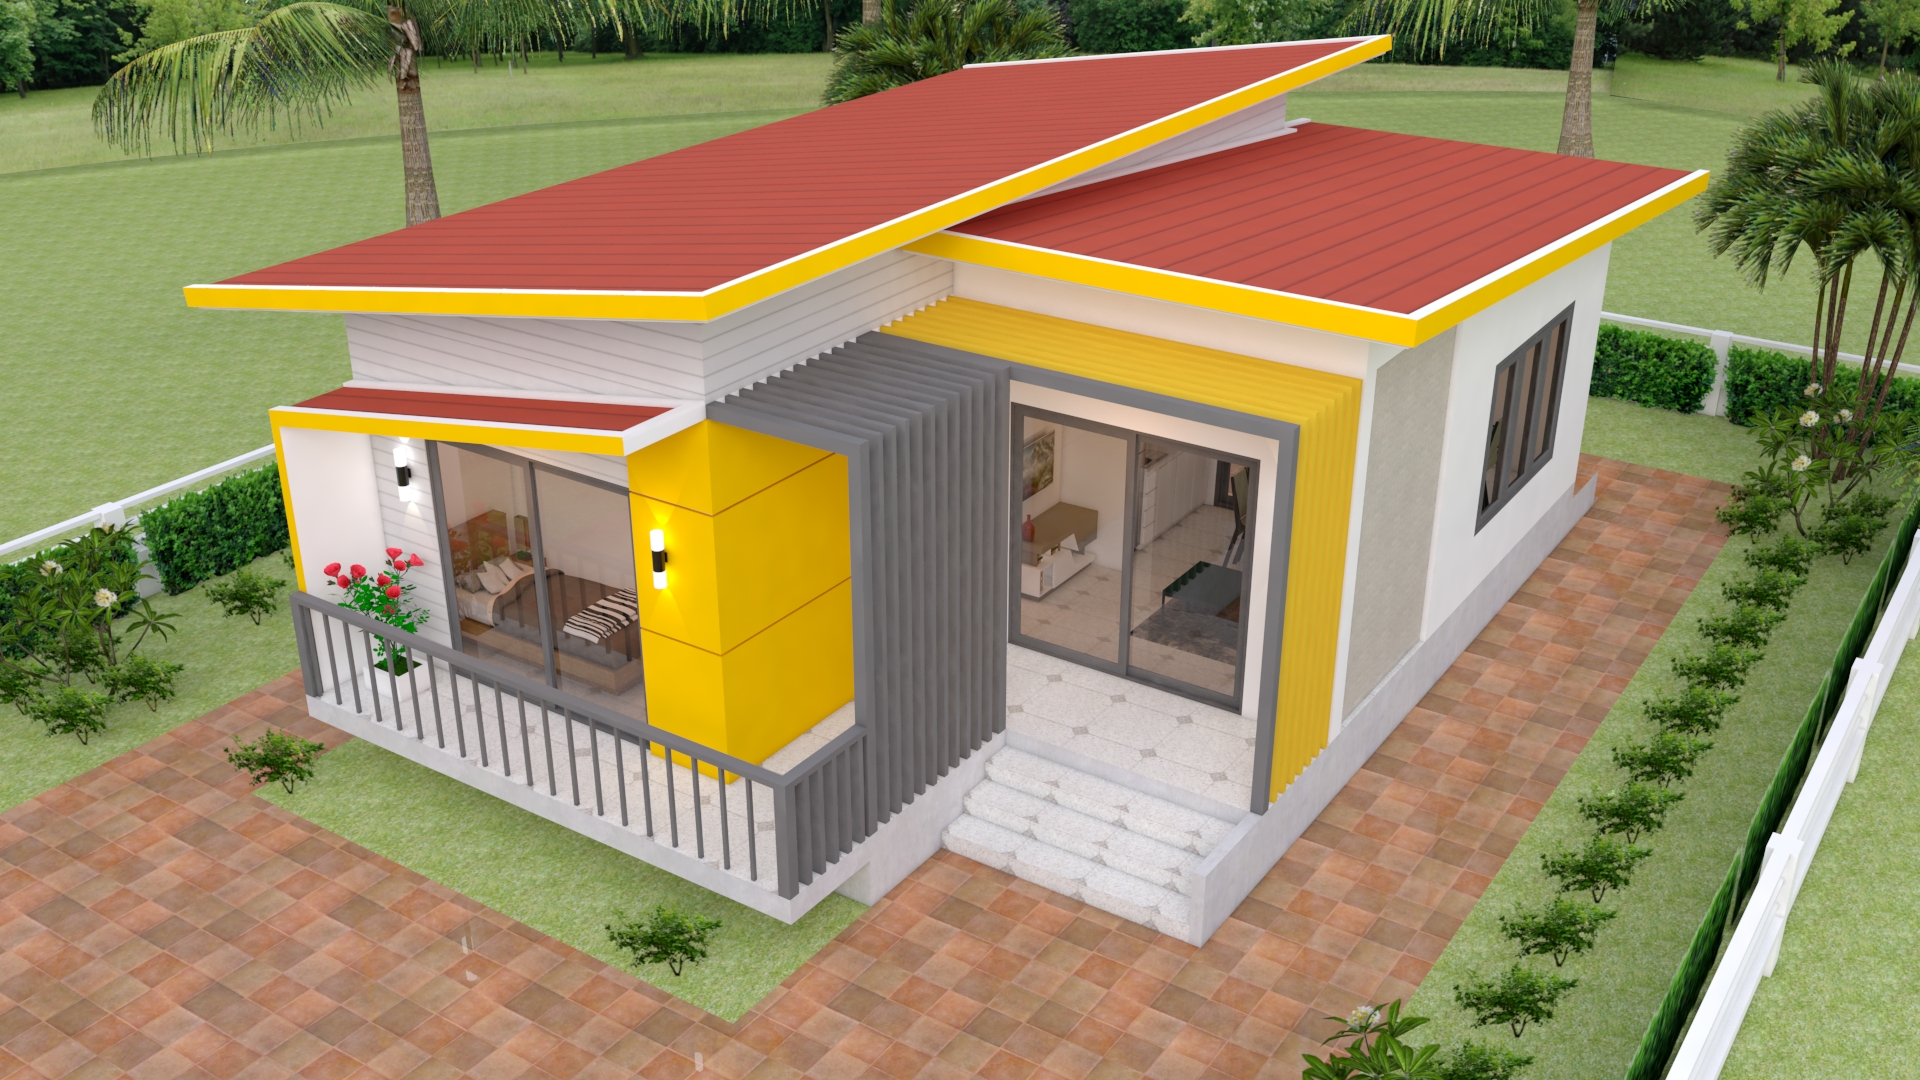 House Design 3d 7.5x11 Meter 25x36 Feet 2 bedrooms Shed Roof